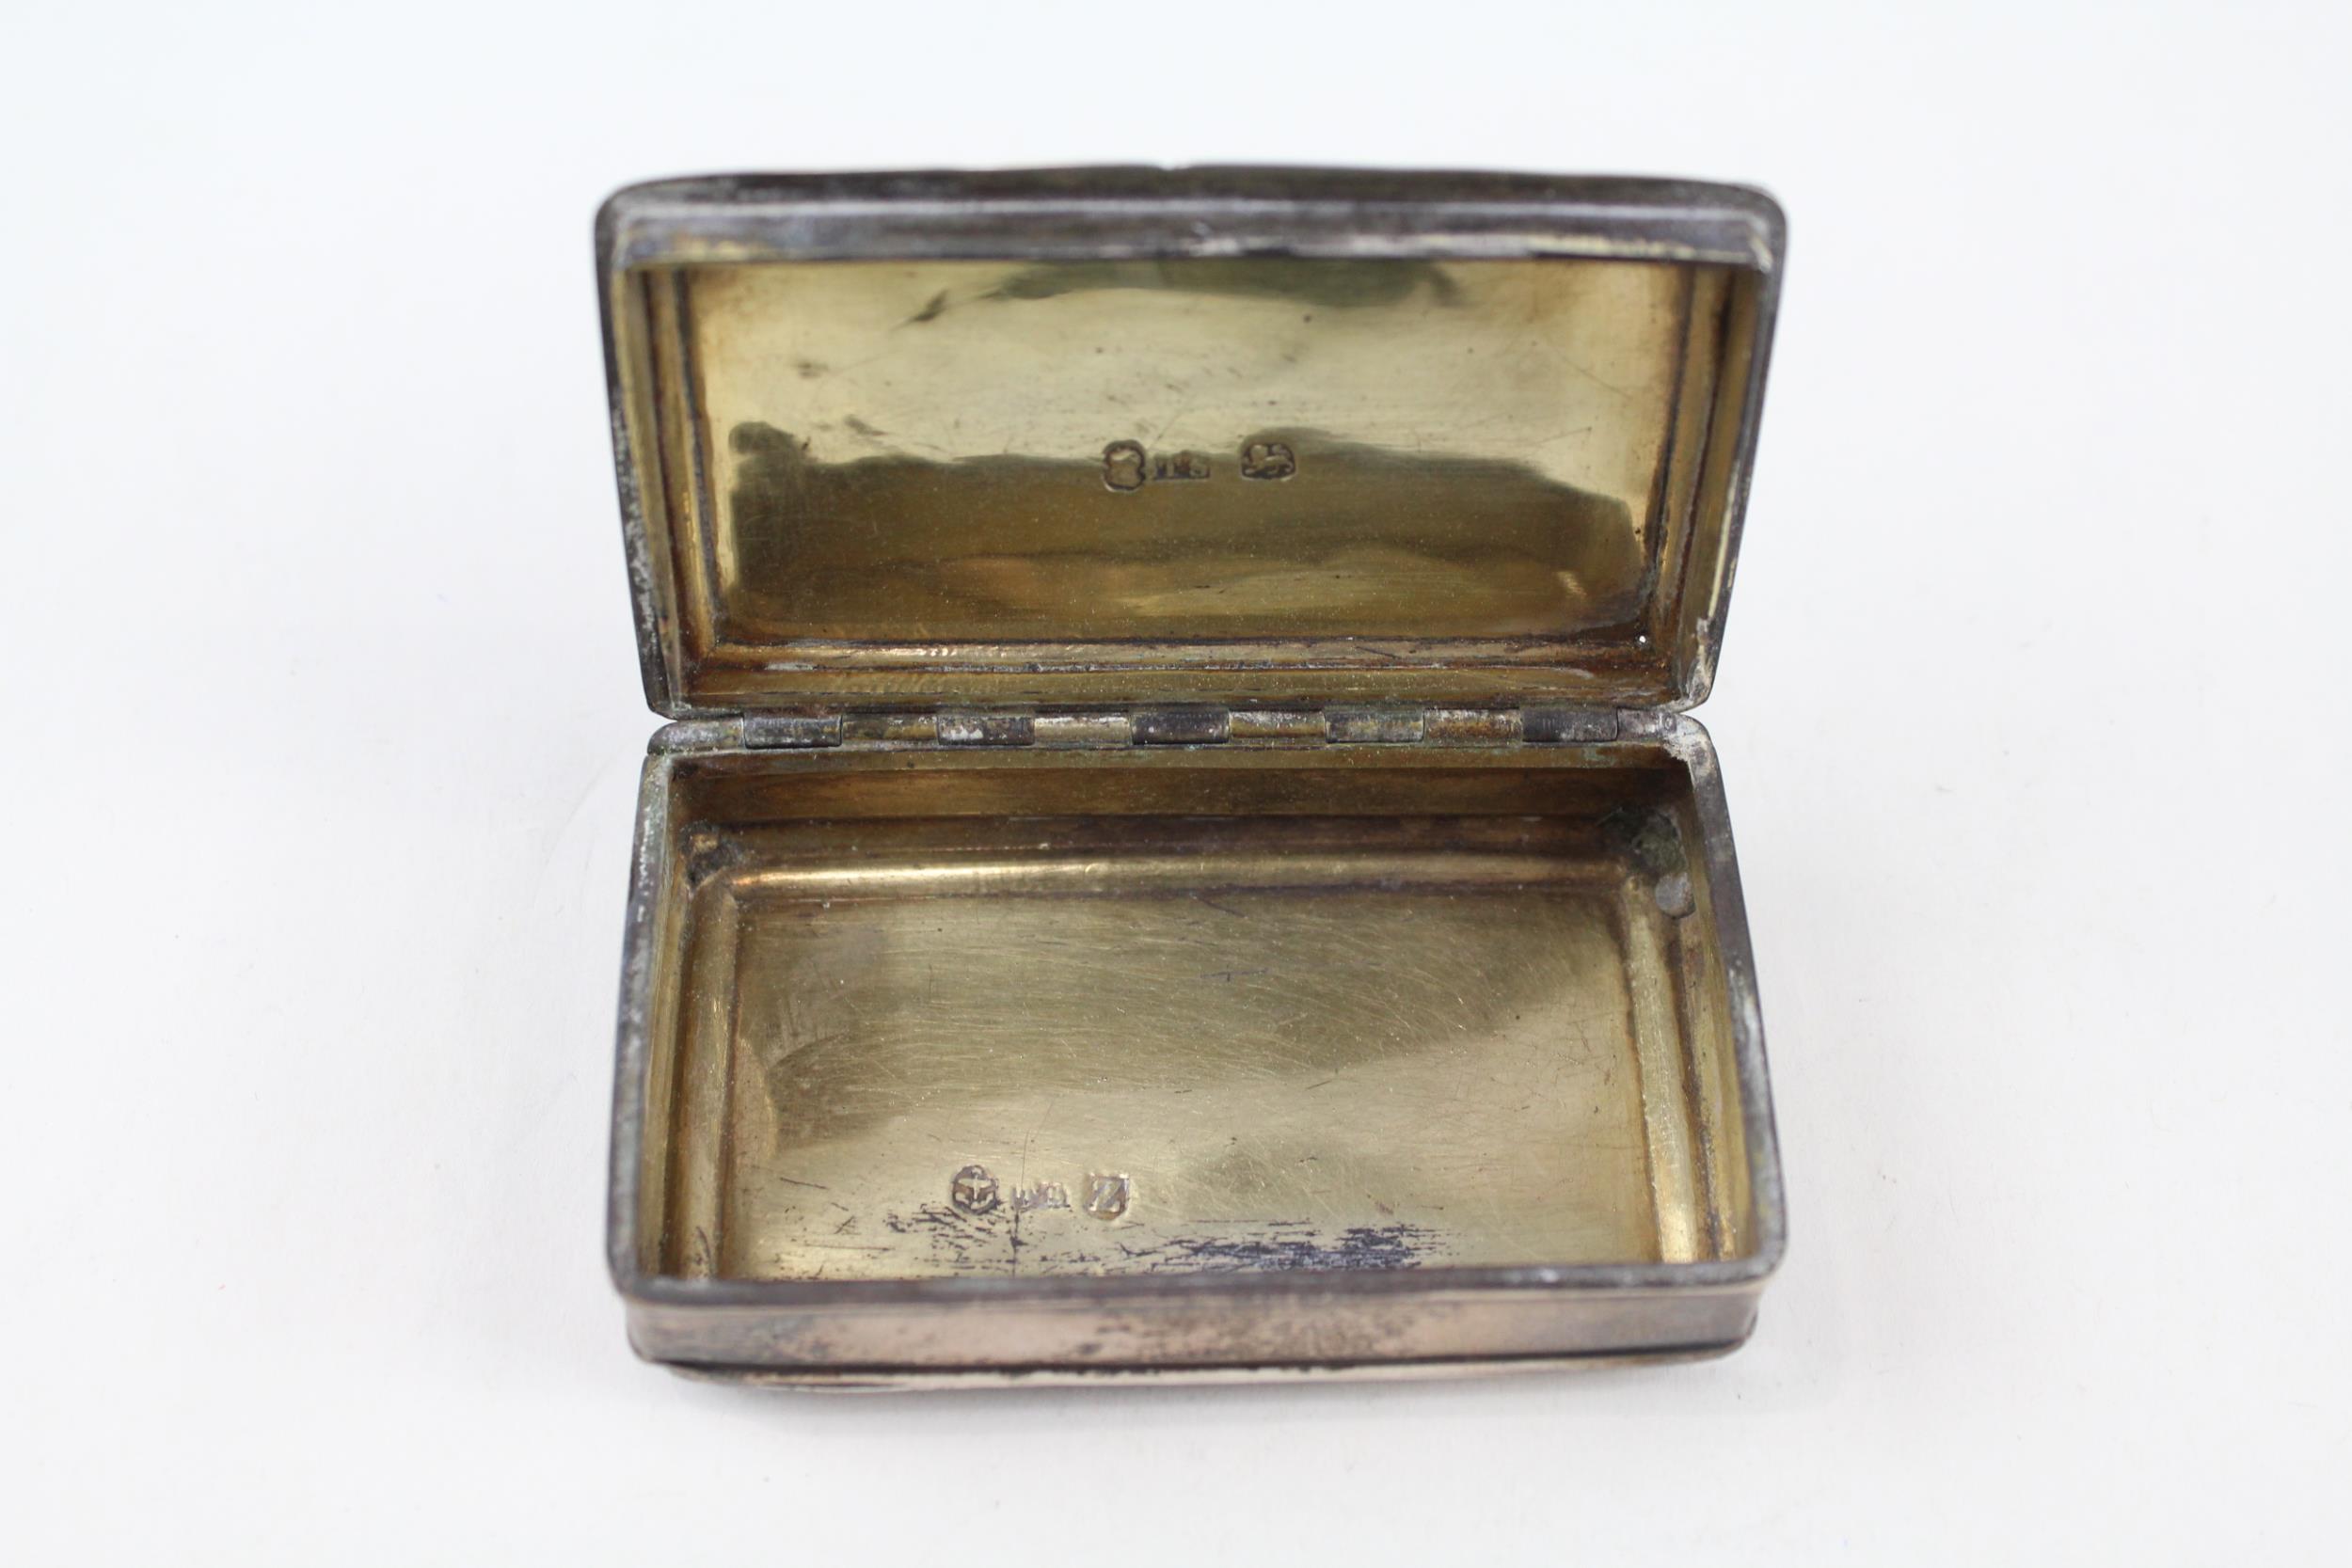 Antique George IV Hallmarked 1823 Birmingham Sterling Silver Snuff Box (64g) - w/ Personal Engraving - Image 3 of 5